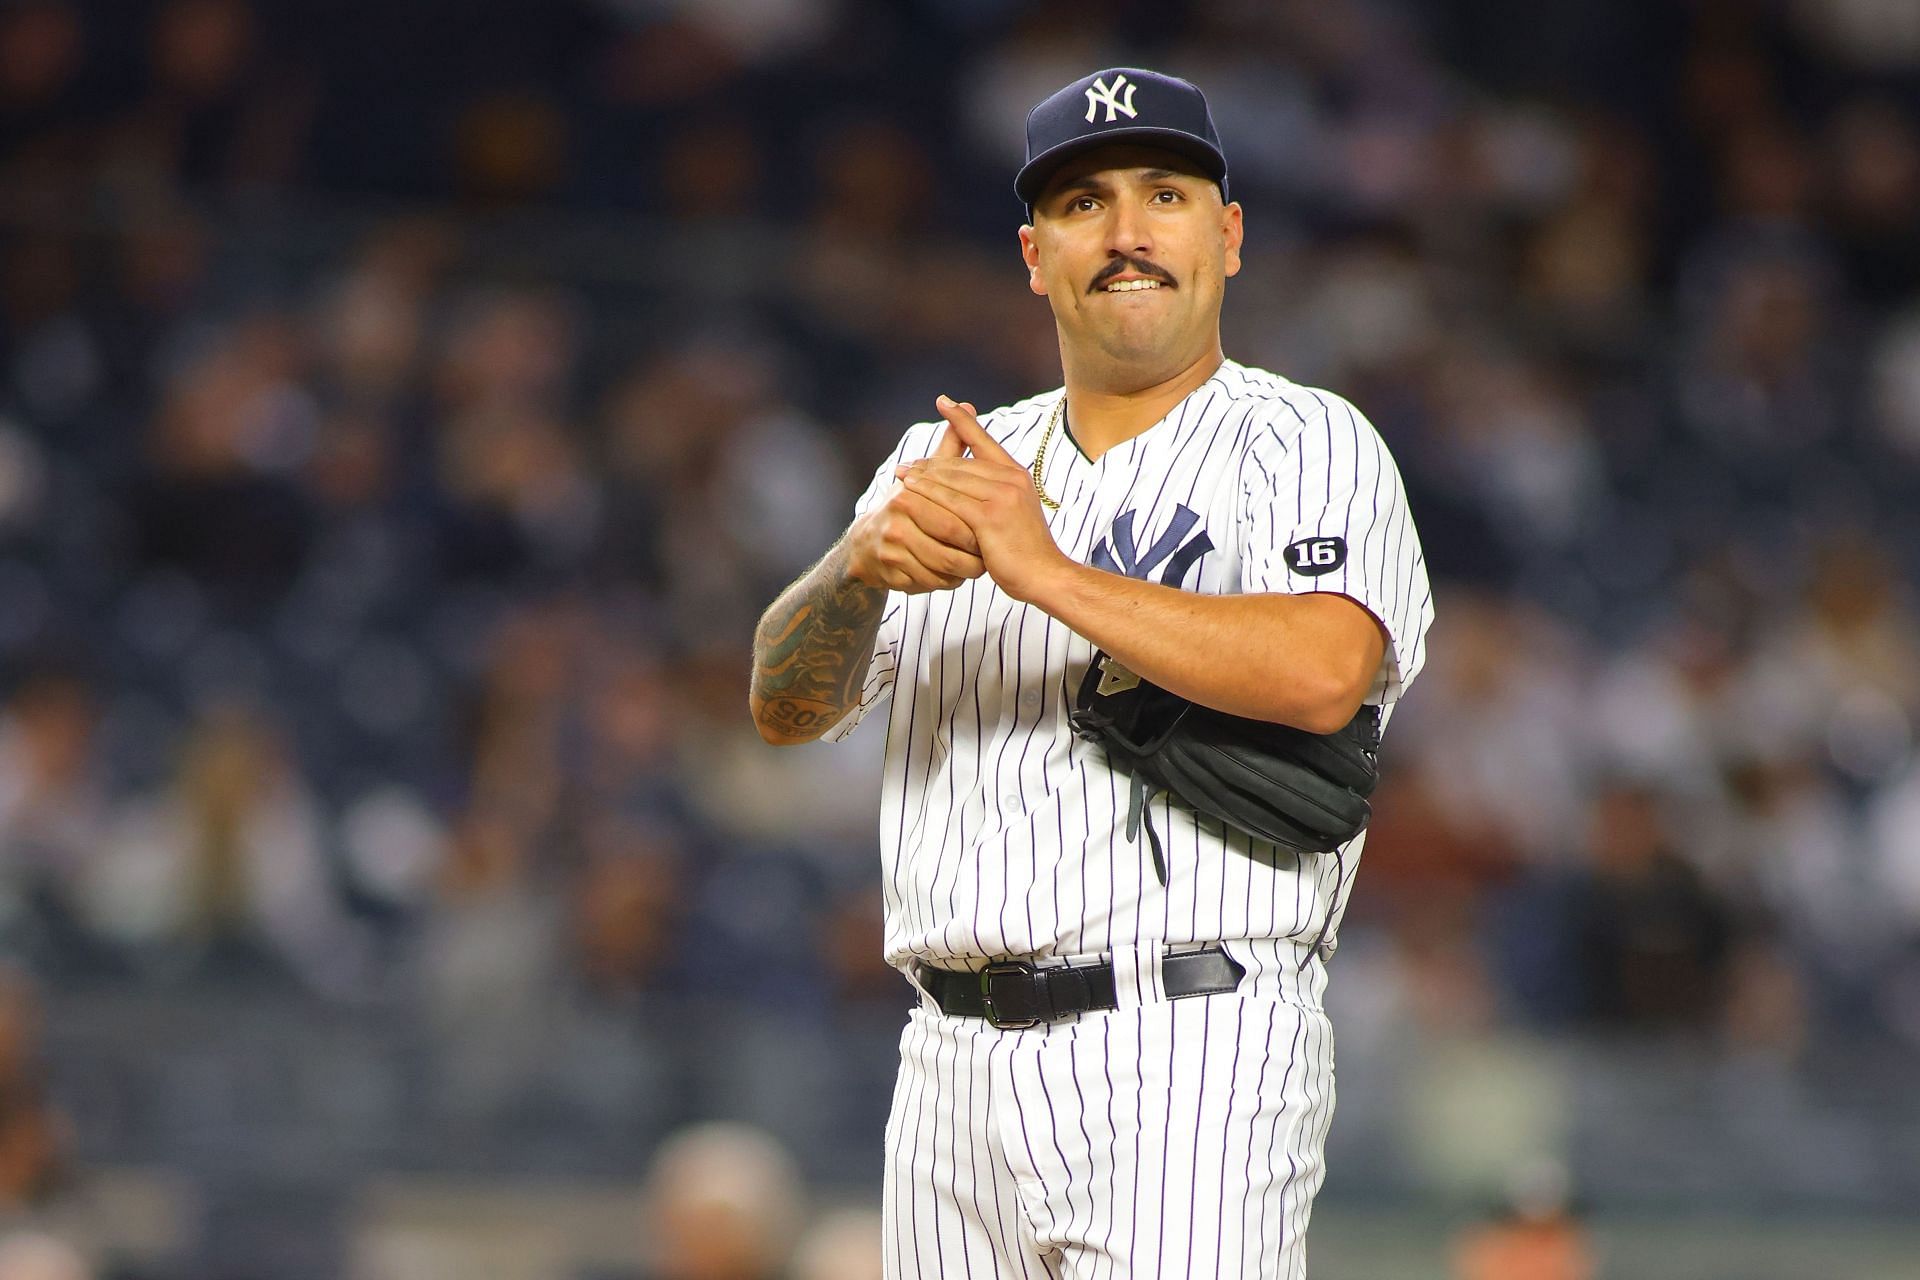 New York Yankees SP Nestor Cortes has posted the lowest ERA by an American League pitcher over the past year.